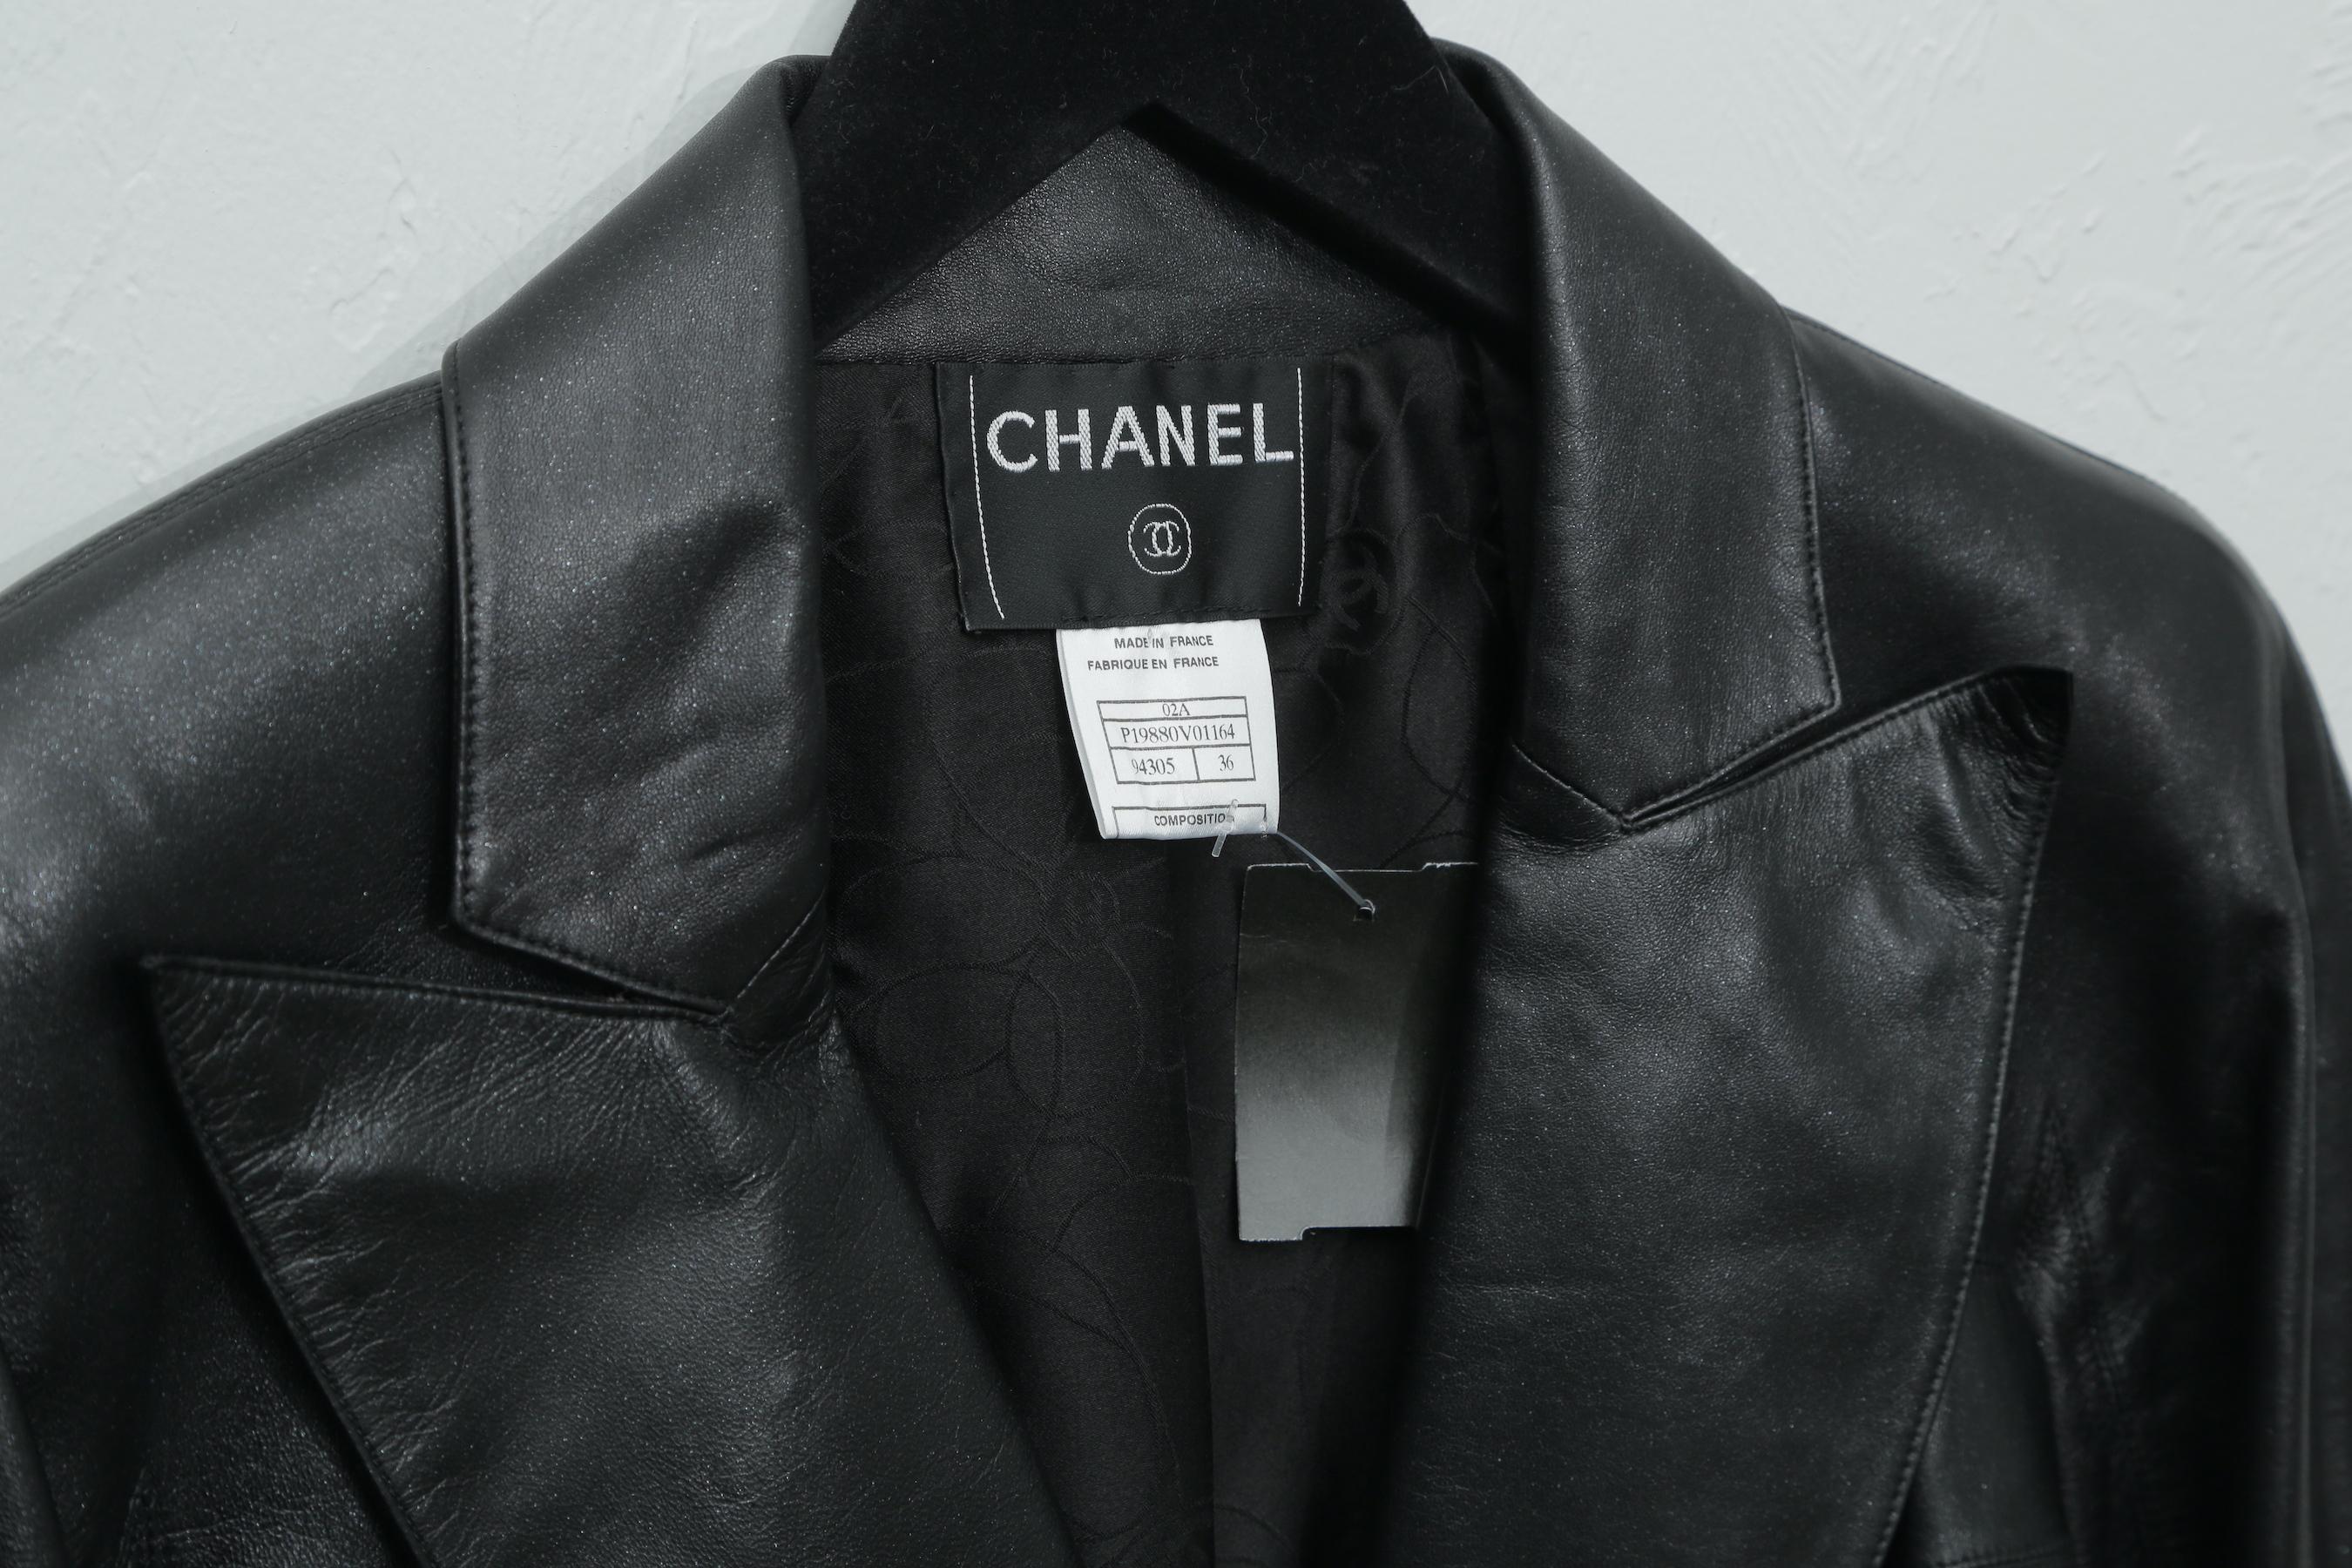 Chanel black metallic leather fitted jacket with three silver logo buttons and vertical pockets.  This is a truly stunning jacket in pristine condition. 4 small